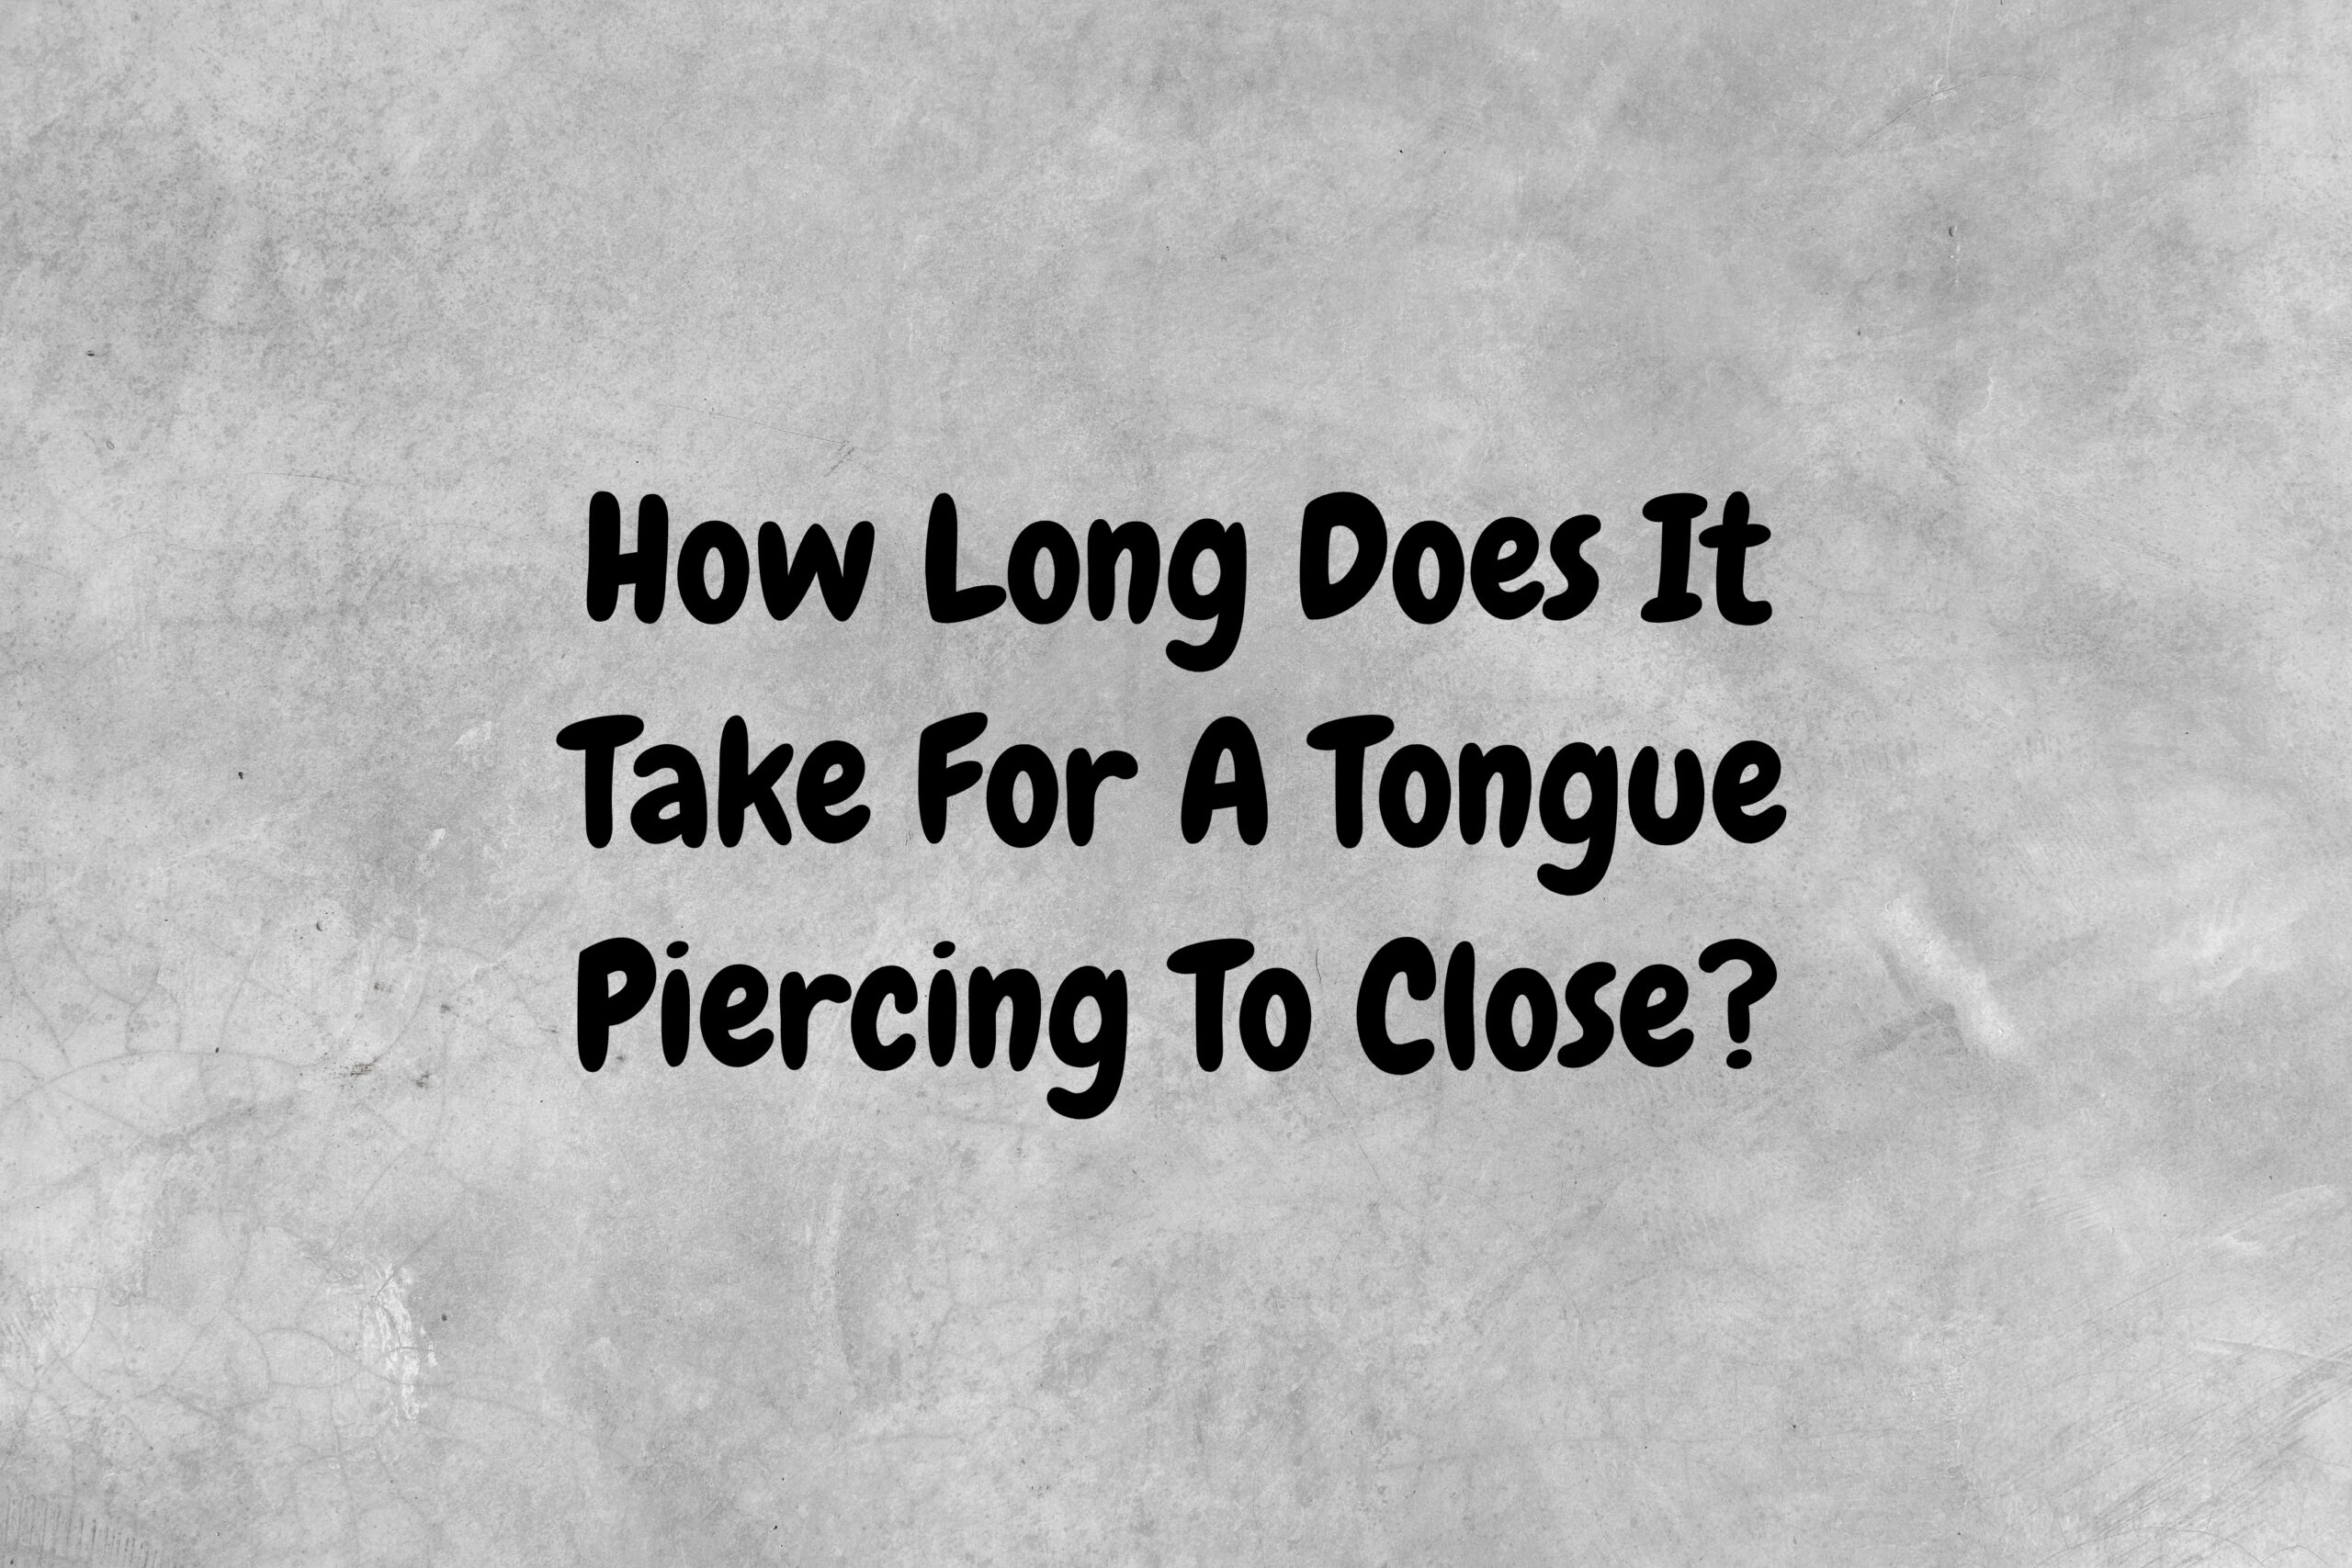 How Long Does It Take For A Tongue Piercing To Close?